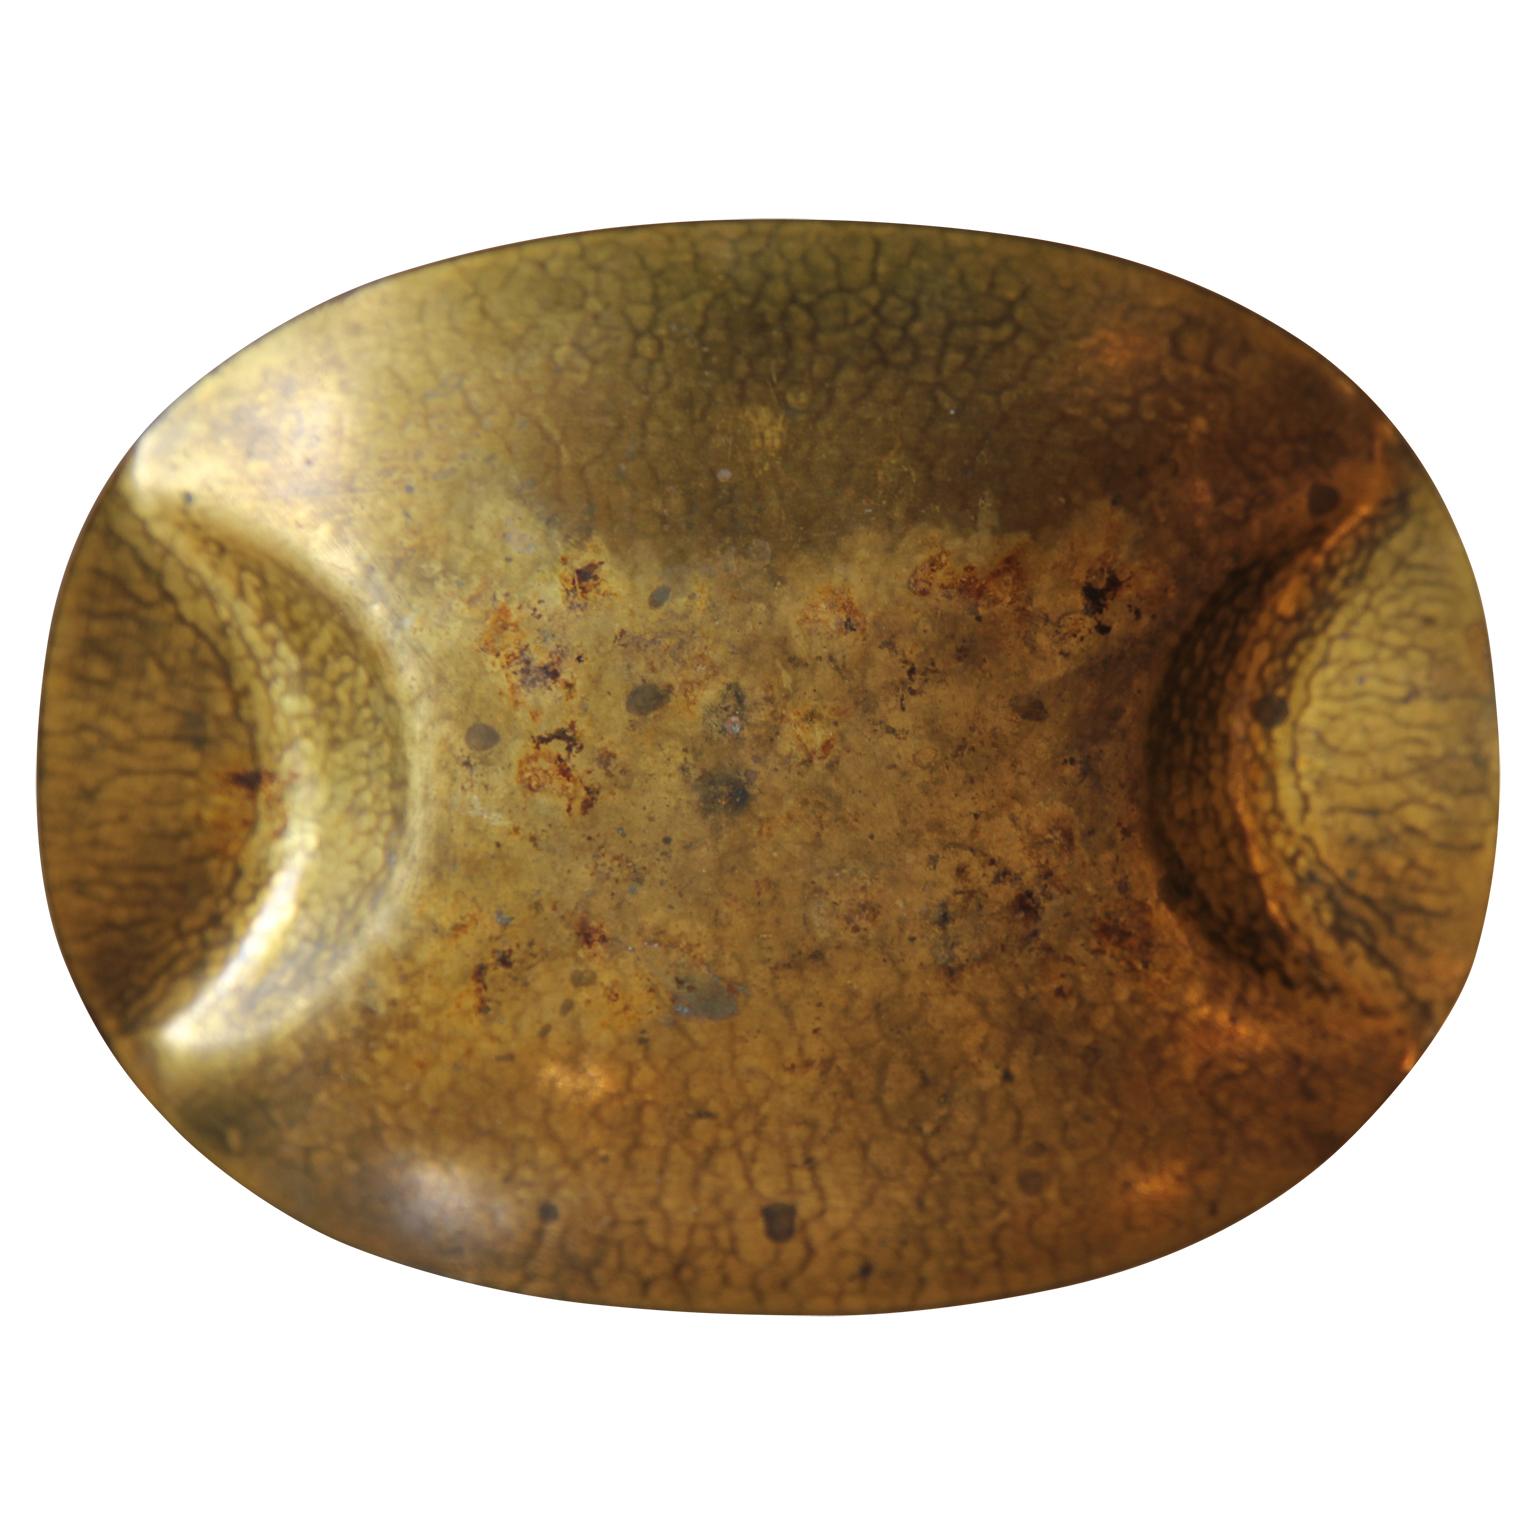 Brass hammered oval dish with two indentions on either side. The dish is stamped by the artist and numbered 998. Hayno Focken was a German modernist known for making hammered table accessories.